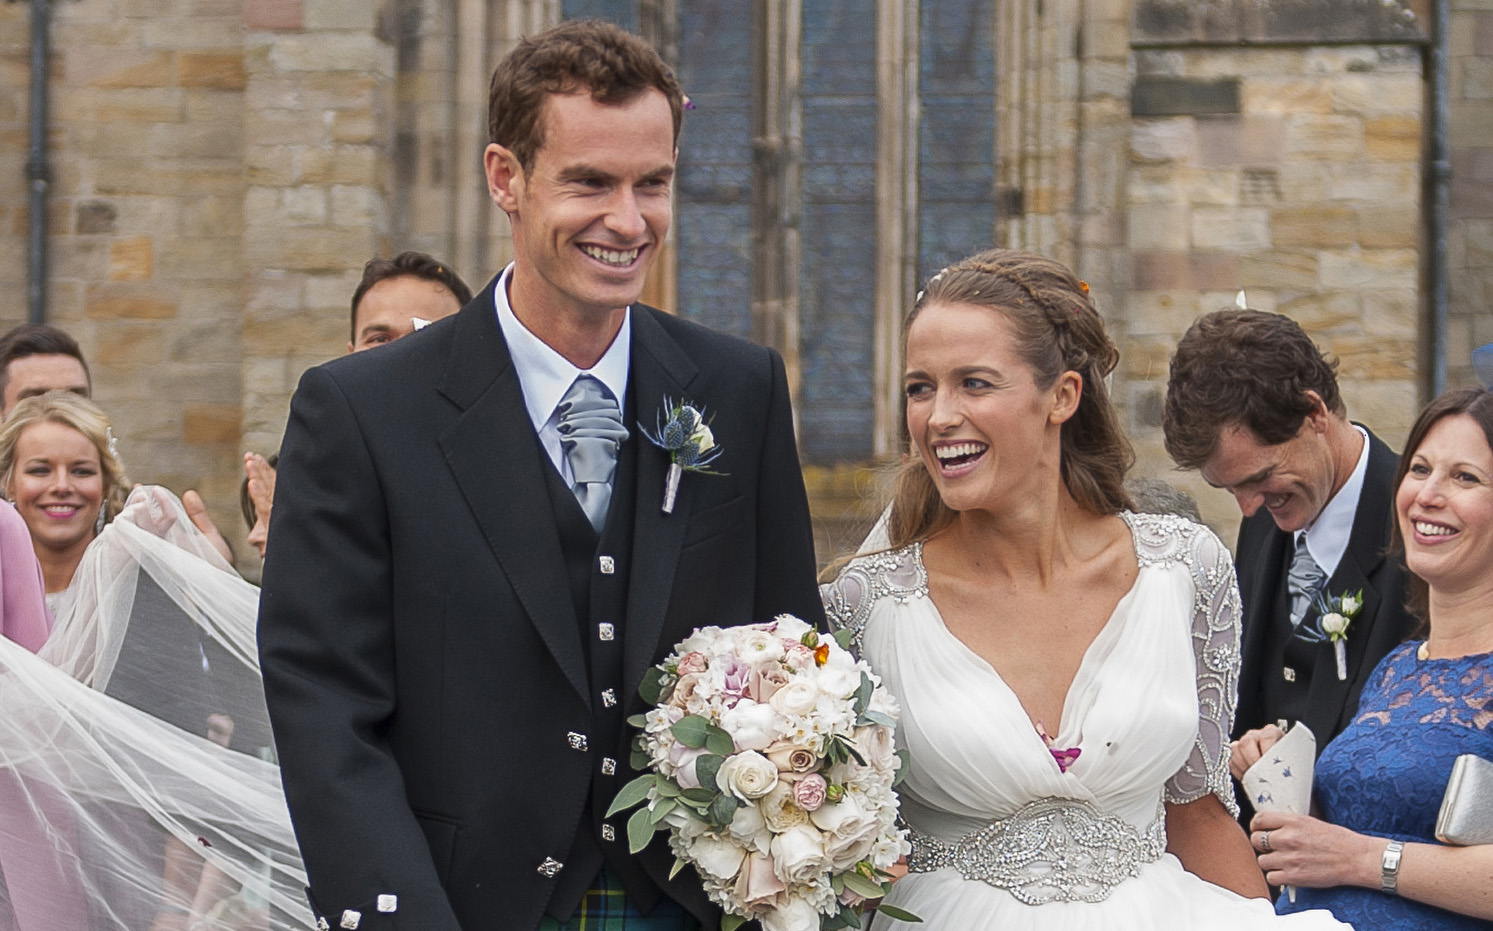 British tennis player Andy Murray and his wife, Kim, leave after their April 11 wedding ceremony at the cathedral in Dunblane, Scotland. (CNS/EPA/Joey Kelly)